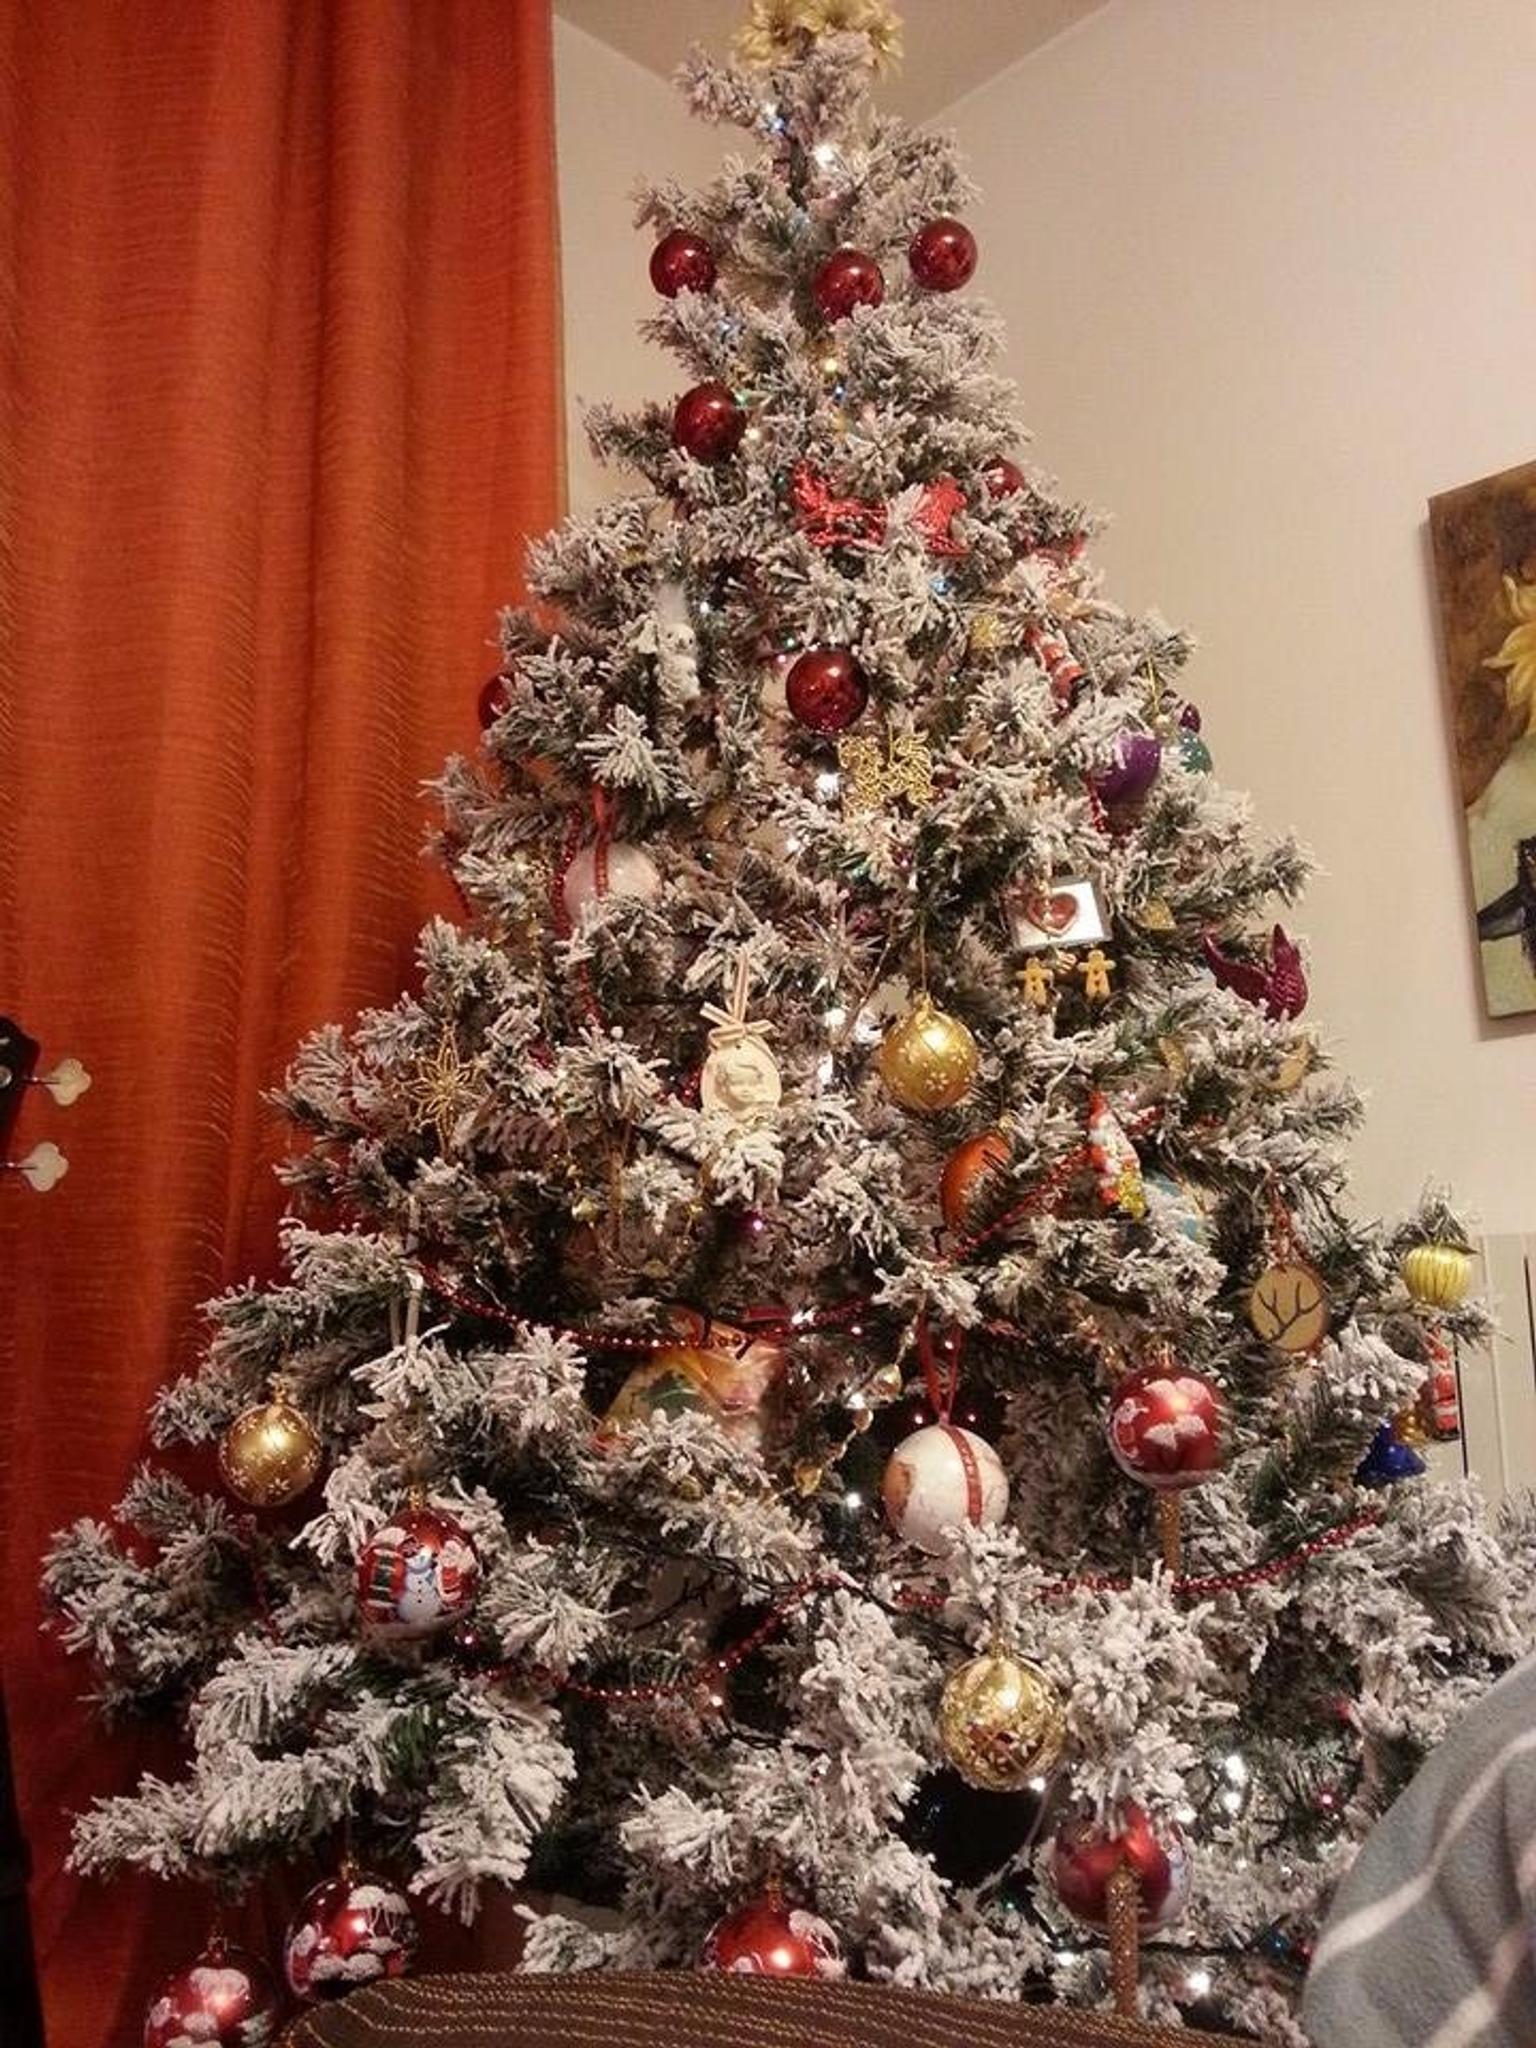 Albero Di Natale Innevato.Albero Di Natale Innevato H 240 Cm In 24044 Dalmine For 150 00 For Sale Shpock